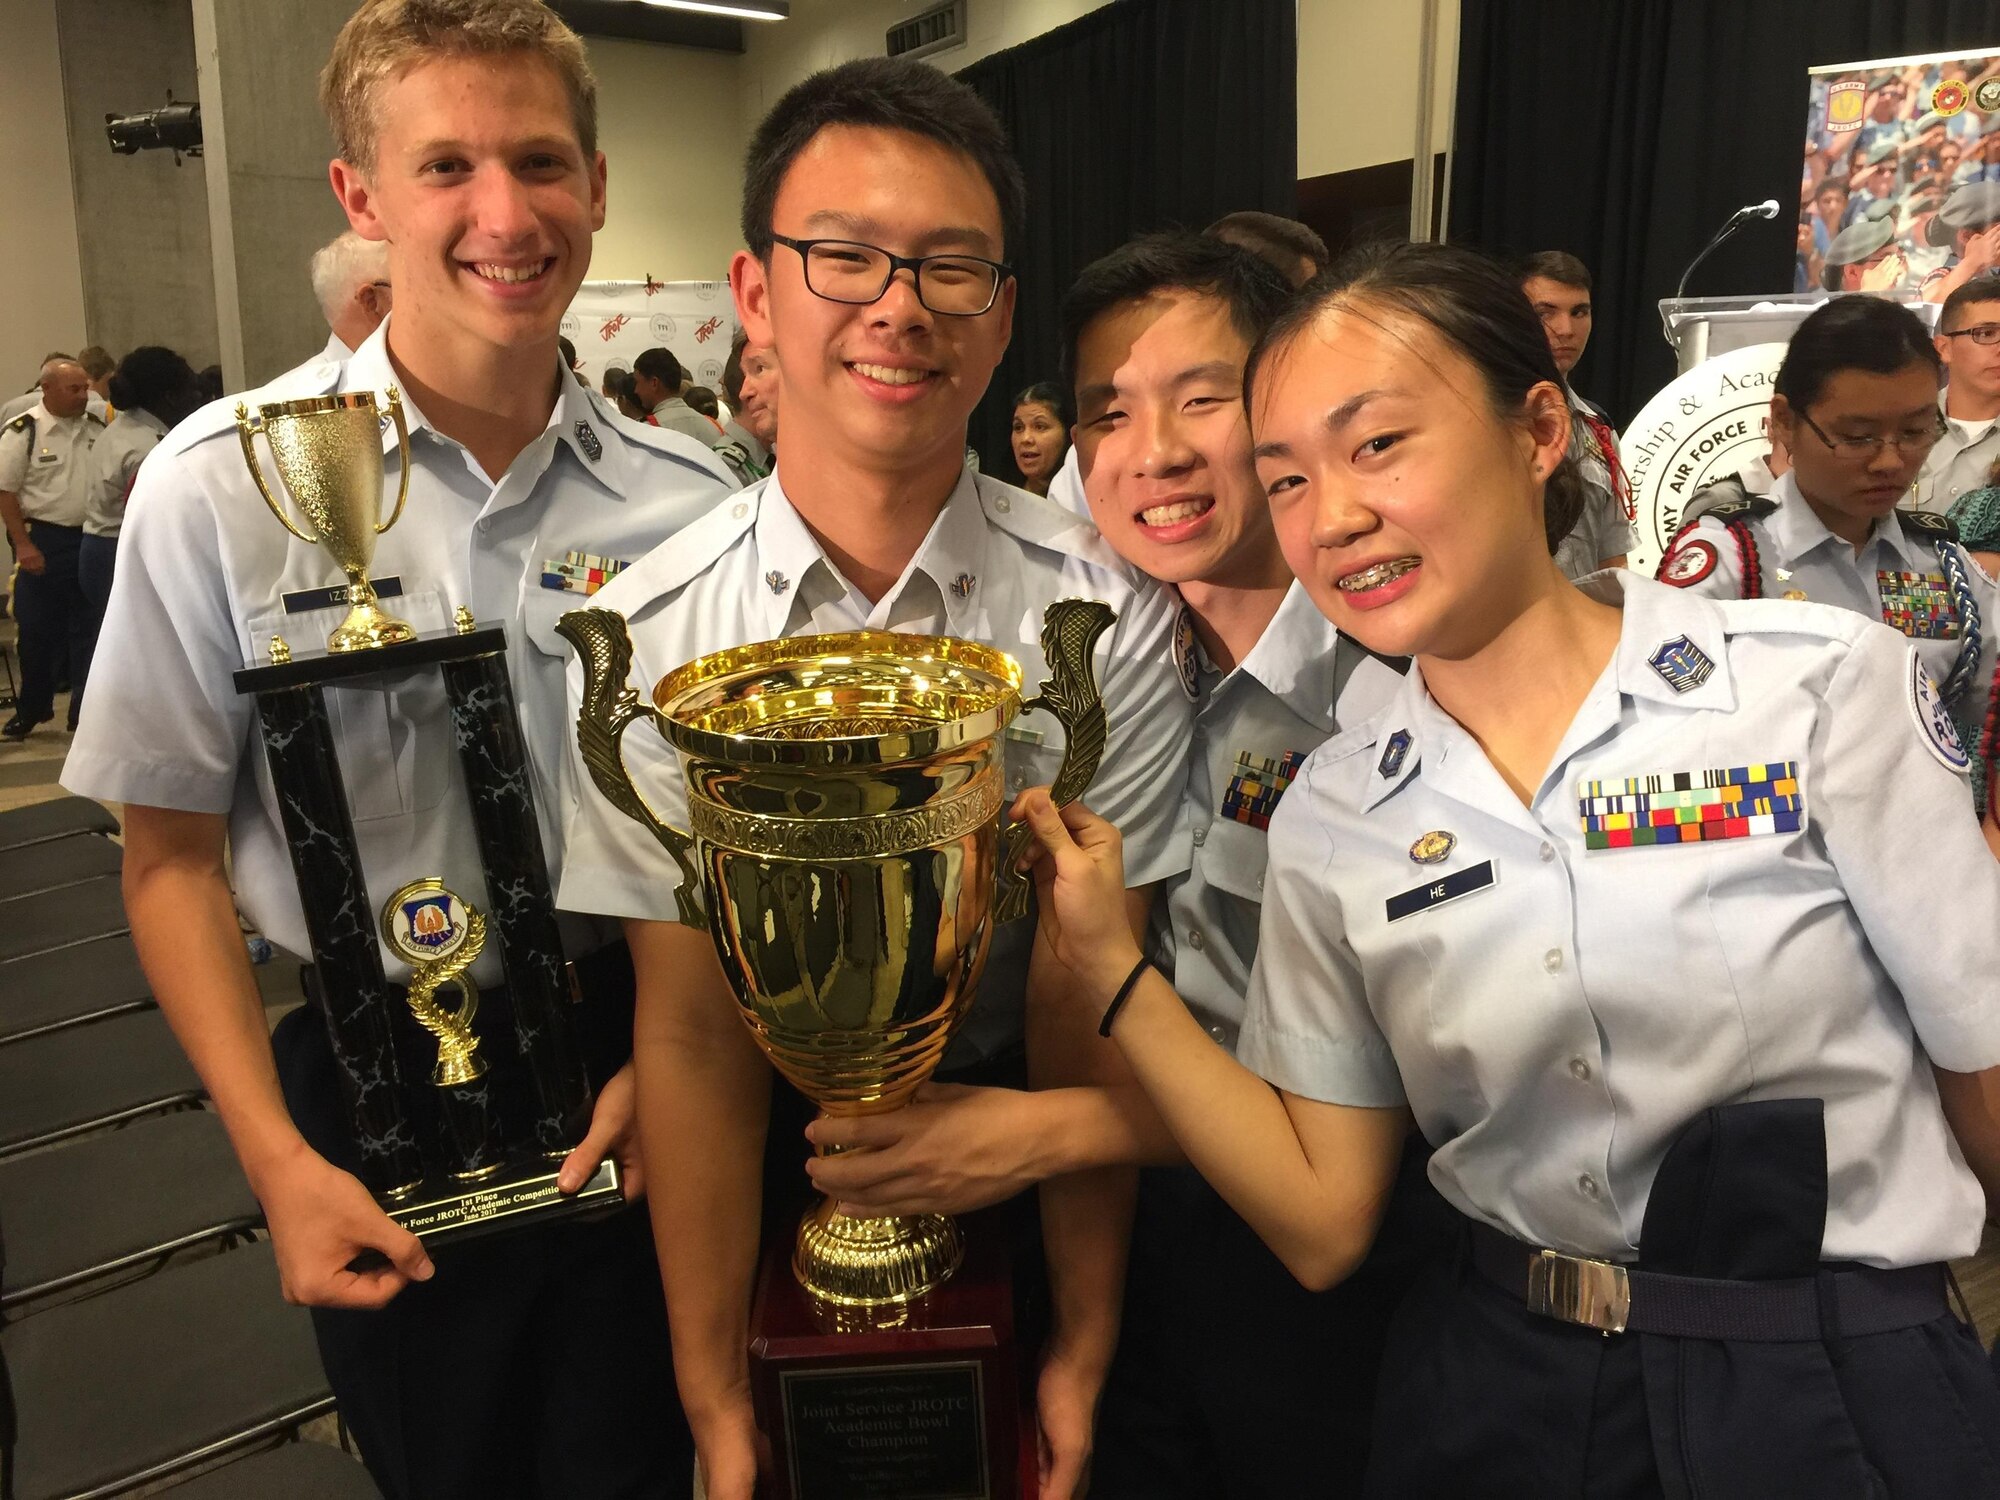 Air Force Junior ROTC cadets from Scripps Ranch High School, San Diego, celebrate after winning the Joint Service Academic Bowl Championship at the 2017 Junior ROTC Leadership and Academic Bowl Championship in Washington, D.C., in June, 2017. This is the second year in a row that cadets from Scripps Ranch have won the award. (Courtesy photo)